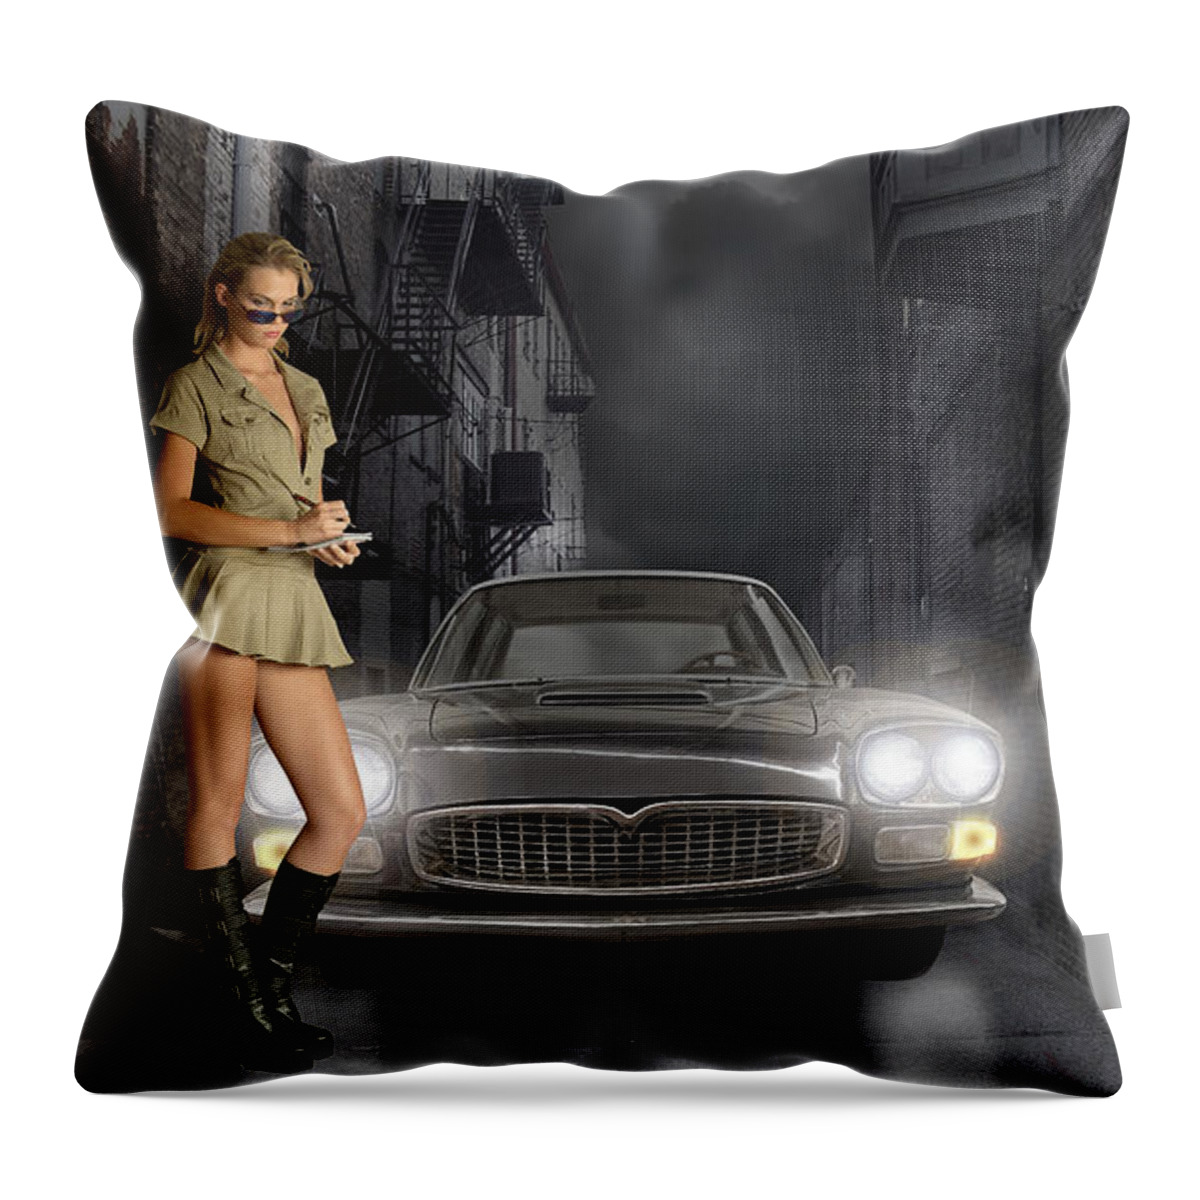 Police Throw Pillow featuring the mixed media One Way Ticket by Marvin Blaine